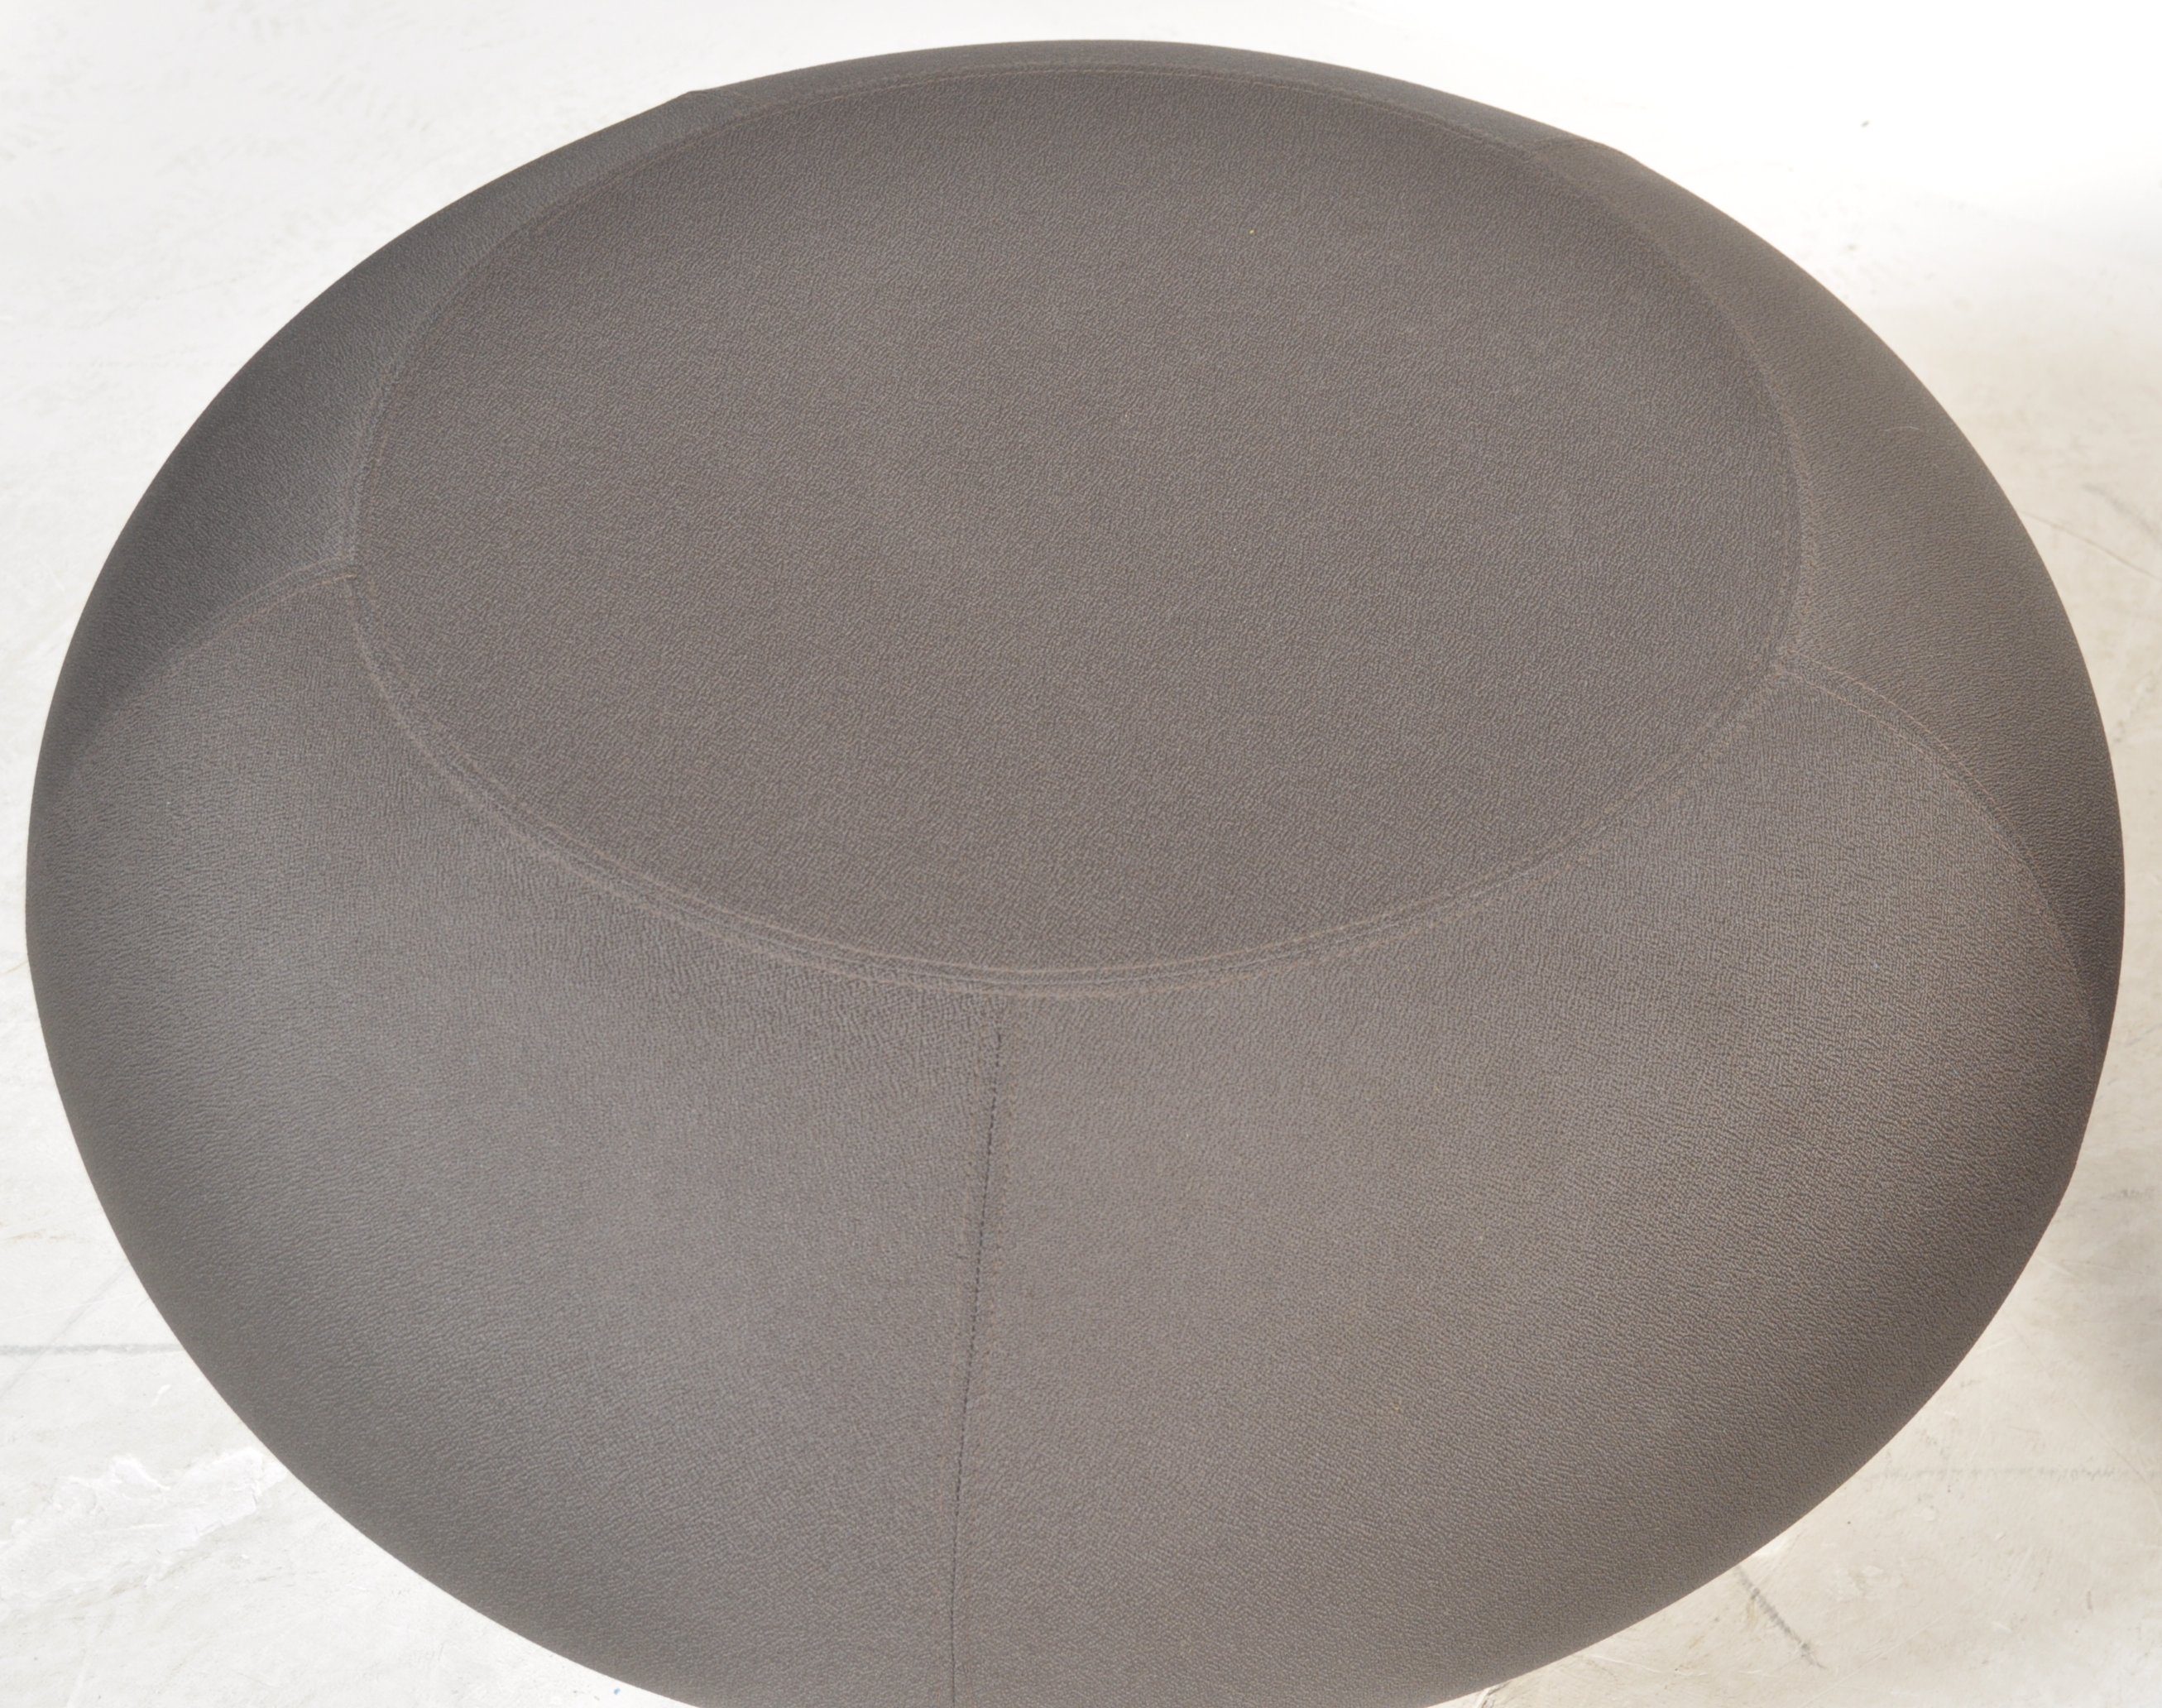 ALLEMUIR A620 MOULDED FOAM PEBBLE CHAIR / STOOL - Image 3 of 5